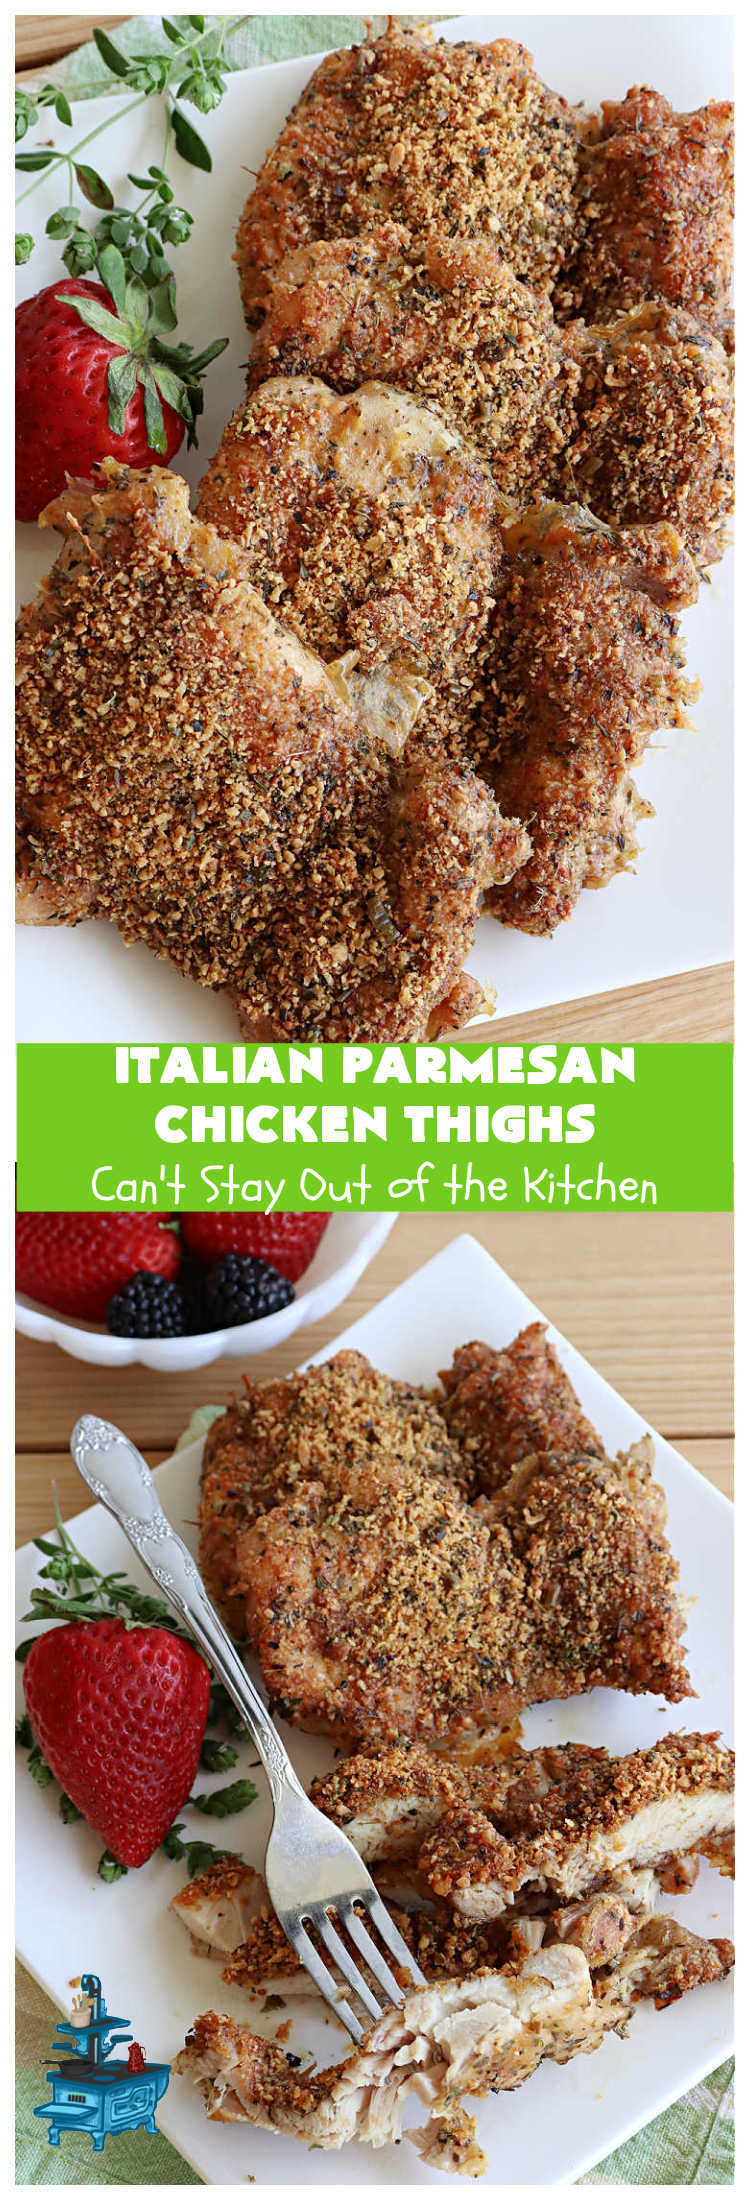 Italian Parmesan Chicken Thighs | Can't Stay Out of the Kitchen | these delicious #ChickenThighs can be oven ready in about 5 minutes. They're so easy to toss together & taste fantastic. This entree uses #Italian flavors like #basil, #oregano & #thyme along with #chives to give it a zesty flavor. #ParmesanCheese makes the coating even better. #GlutenFree #chicken #poultry #ItalianParmesanChickenThighs